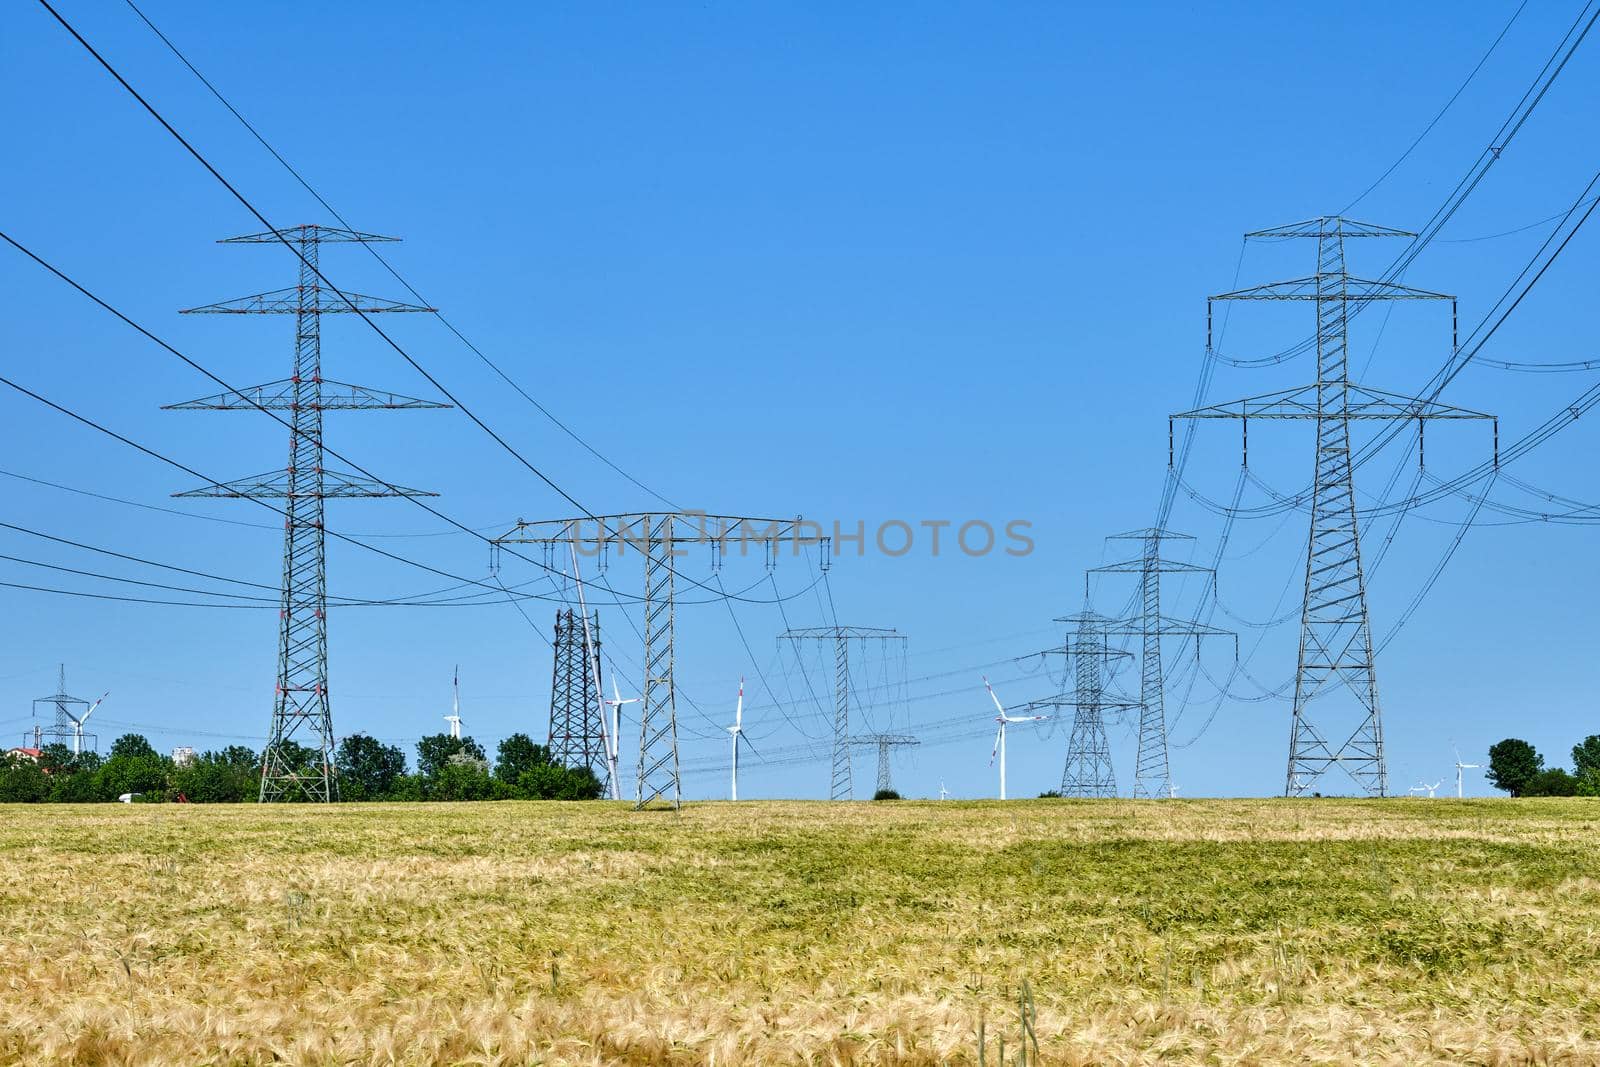 Electricity pylons and power lines with wind turbines in the back in Germany